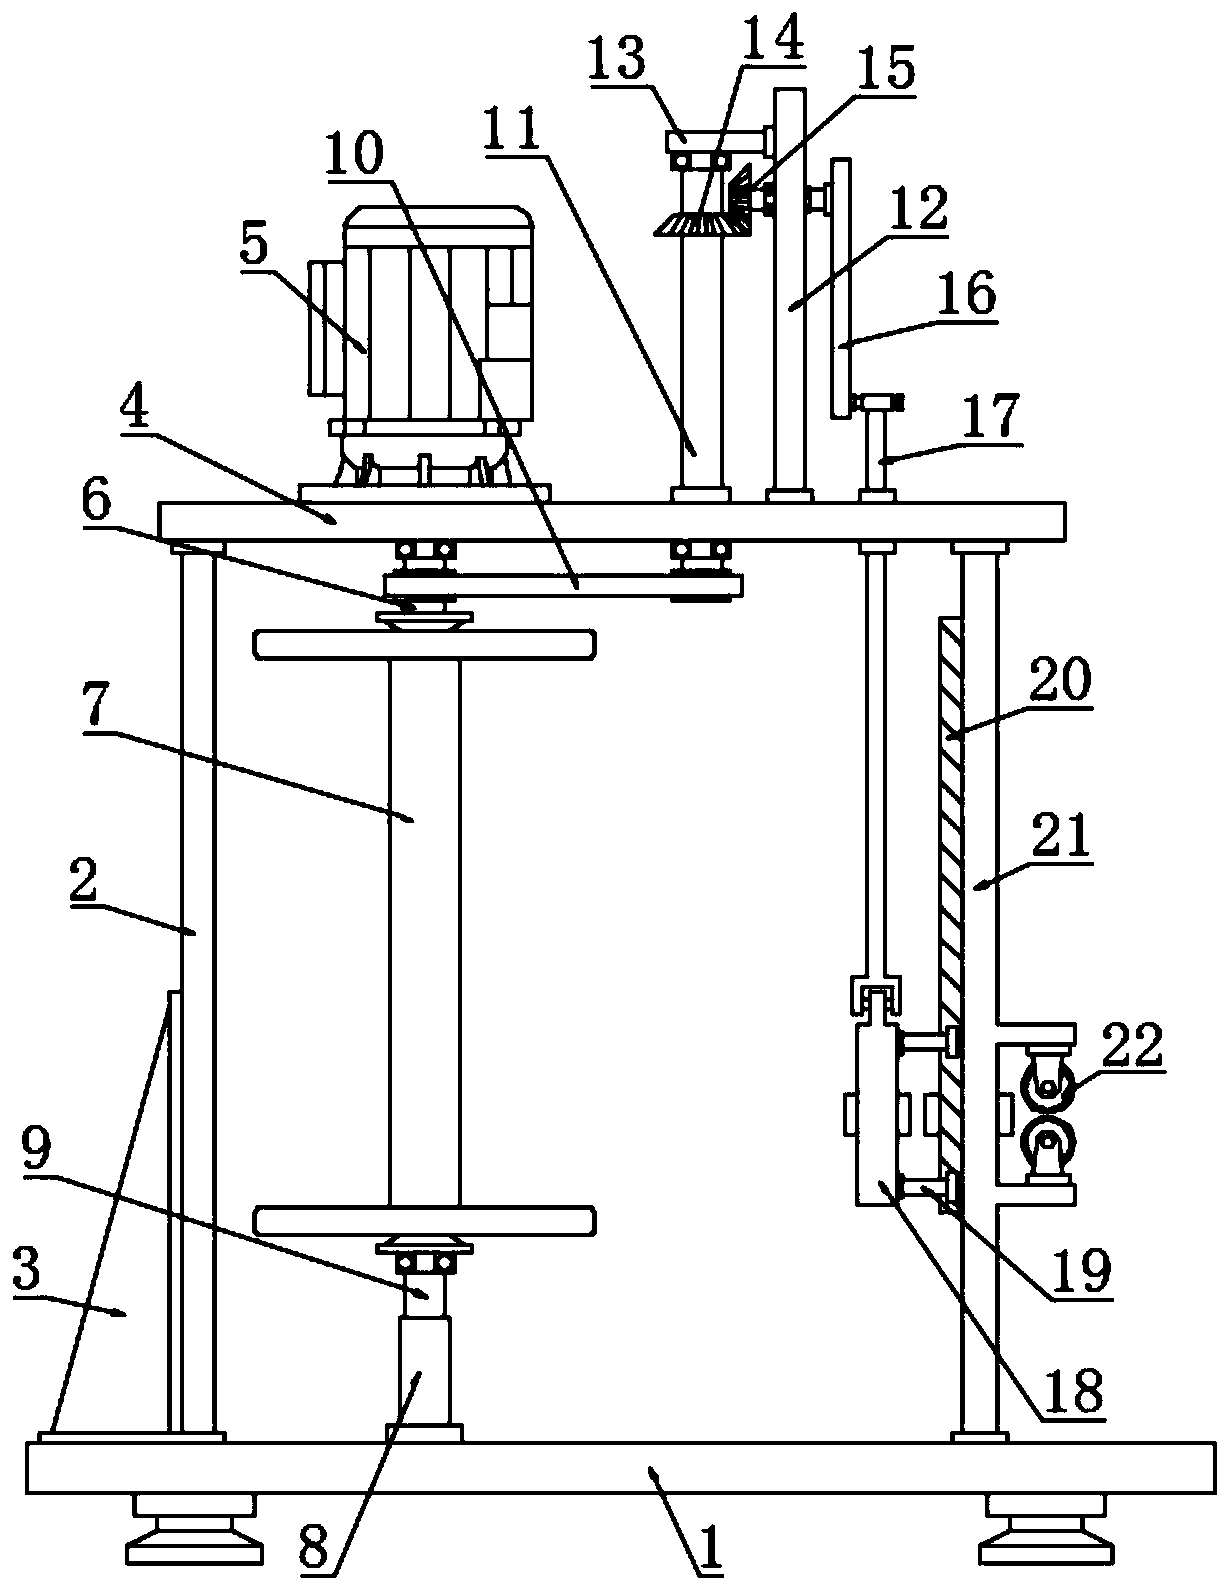 Winding device for uniformly winding enameled wire